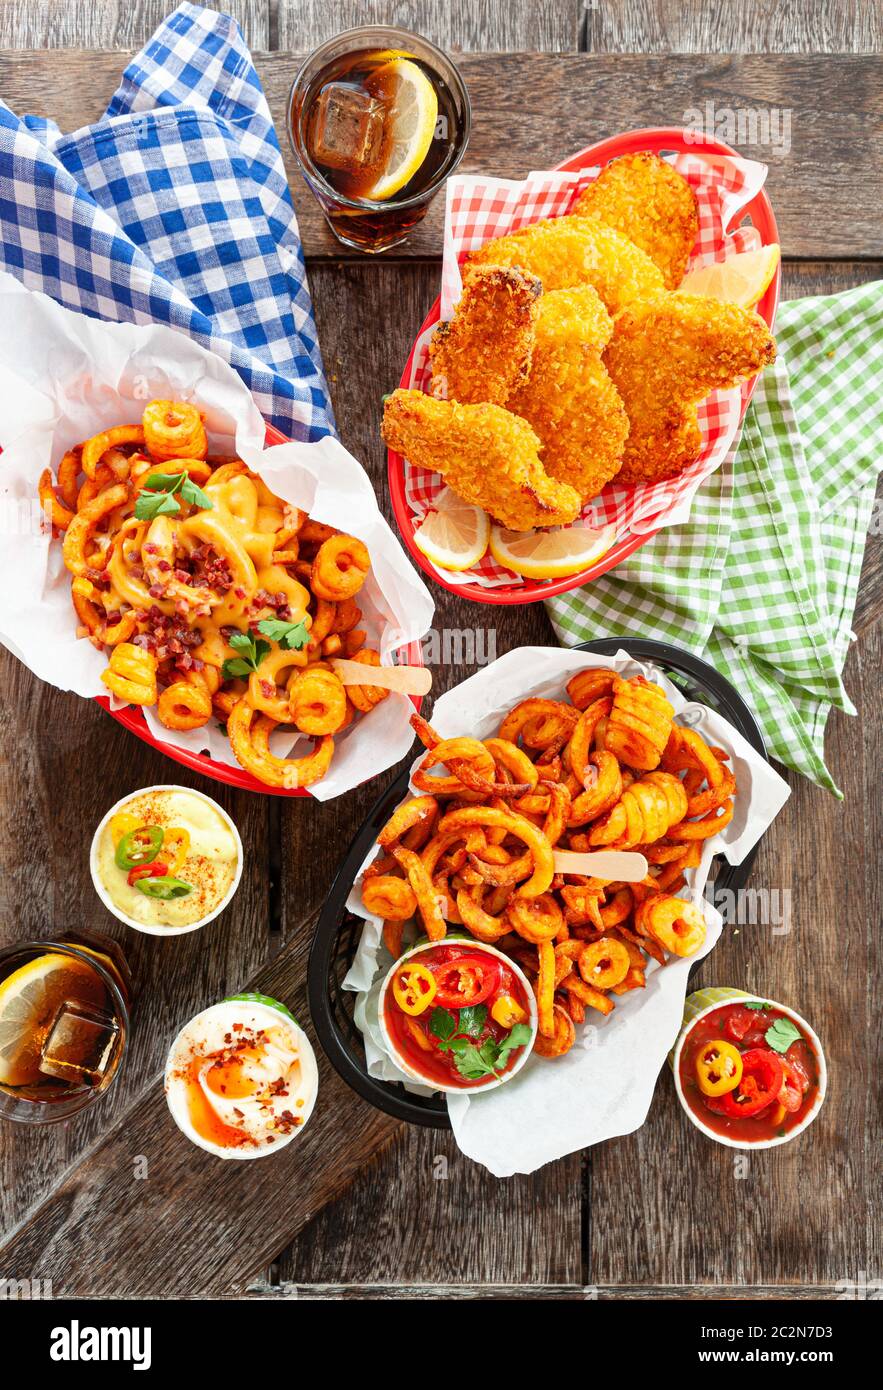 Tasty fast food with curly fries and fried chicken fingers Stock Photo